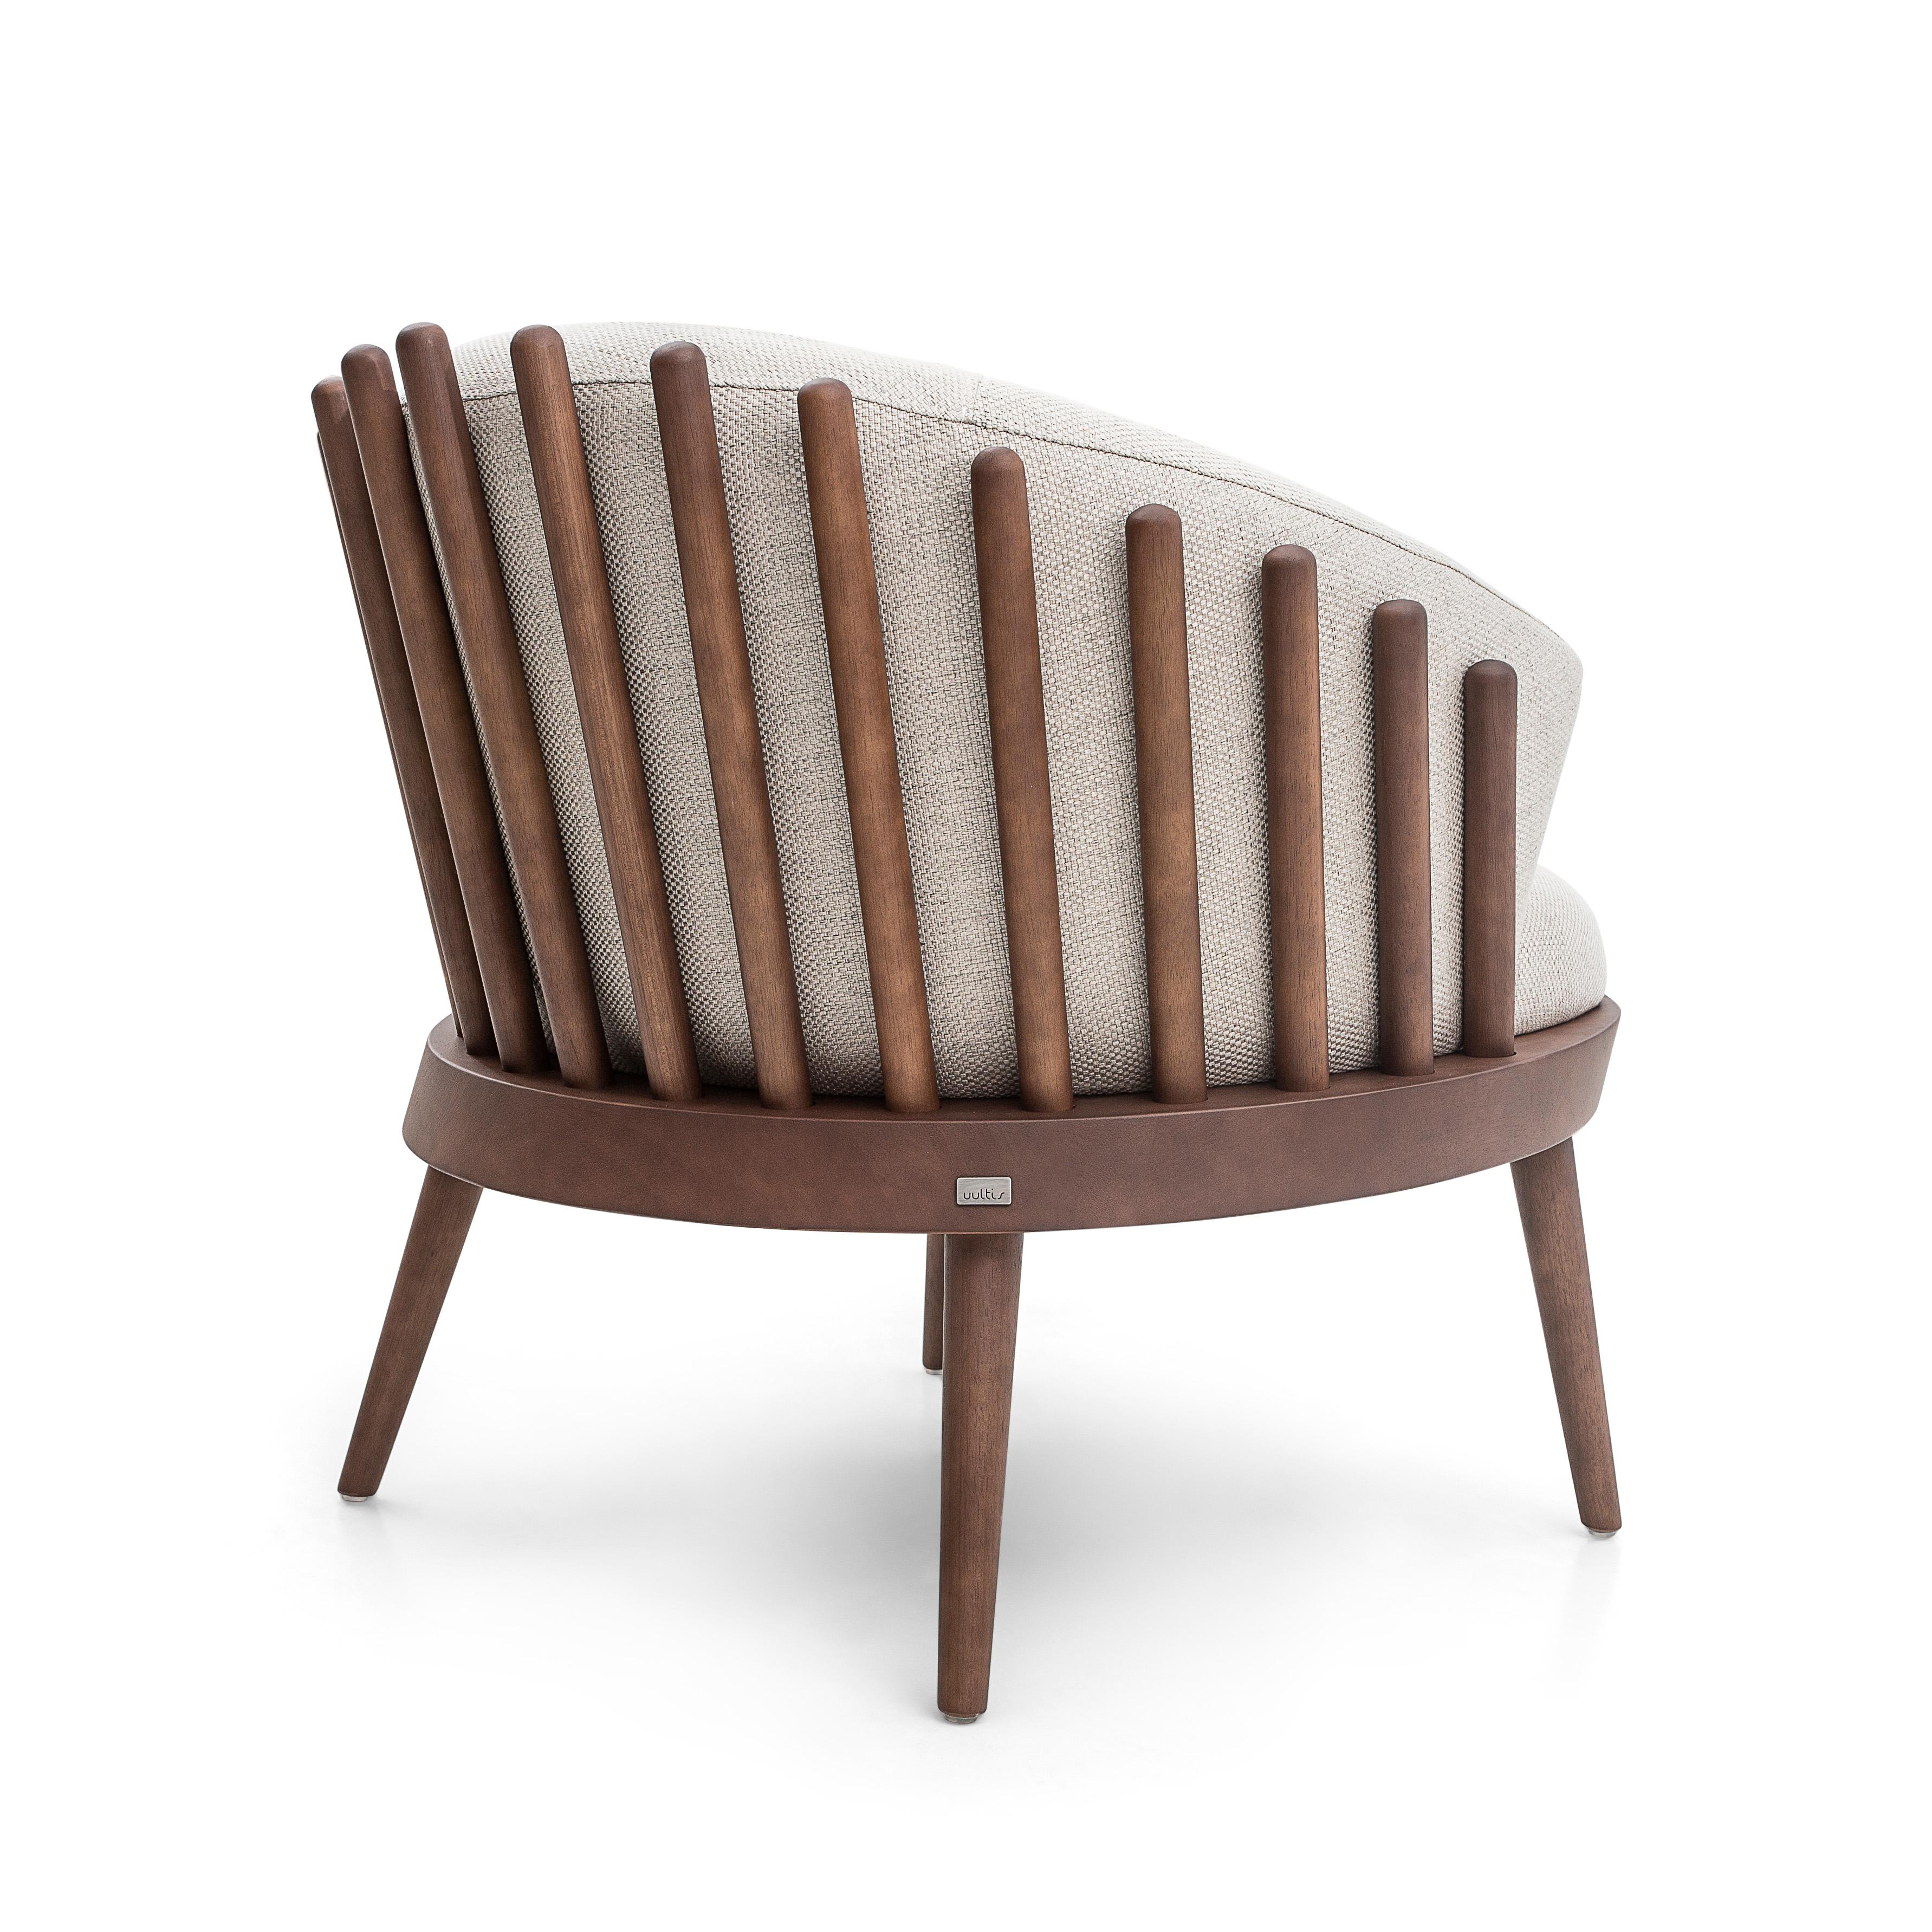 Brazilian Fane Upholstered Armchair in Walnut Wood Finish and Off-White Fabric For Sale